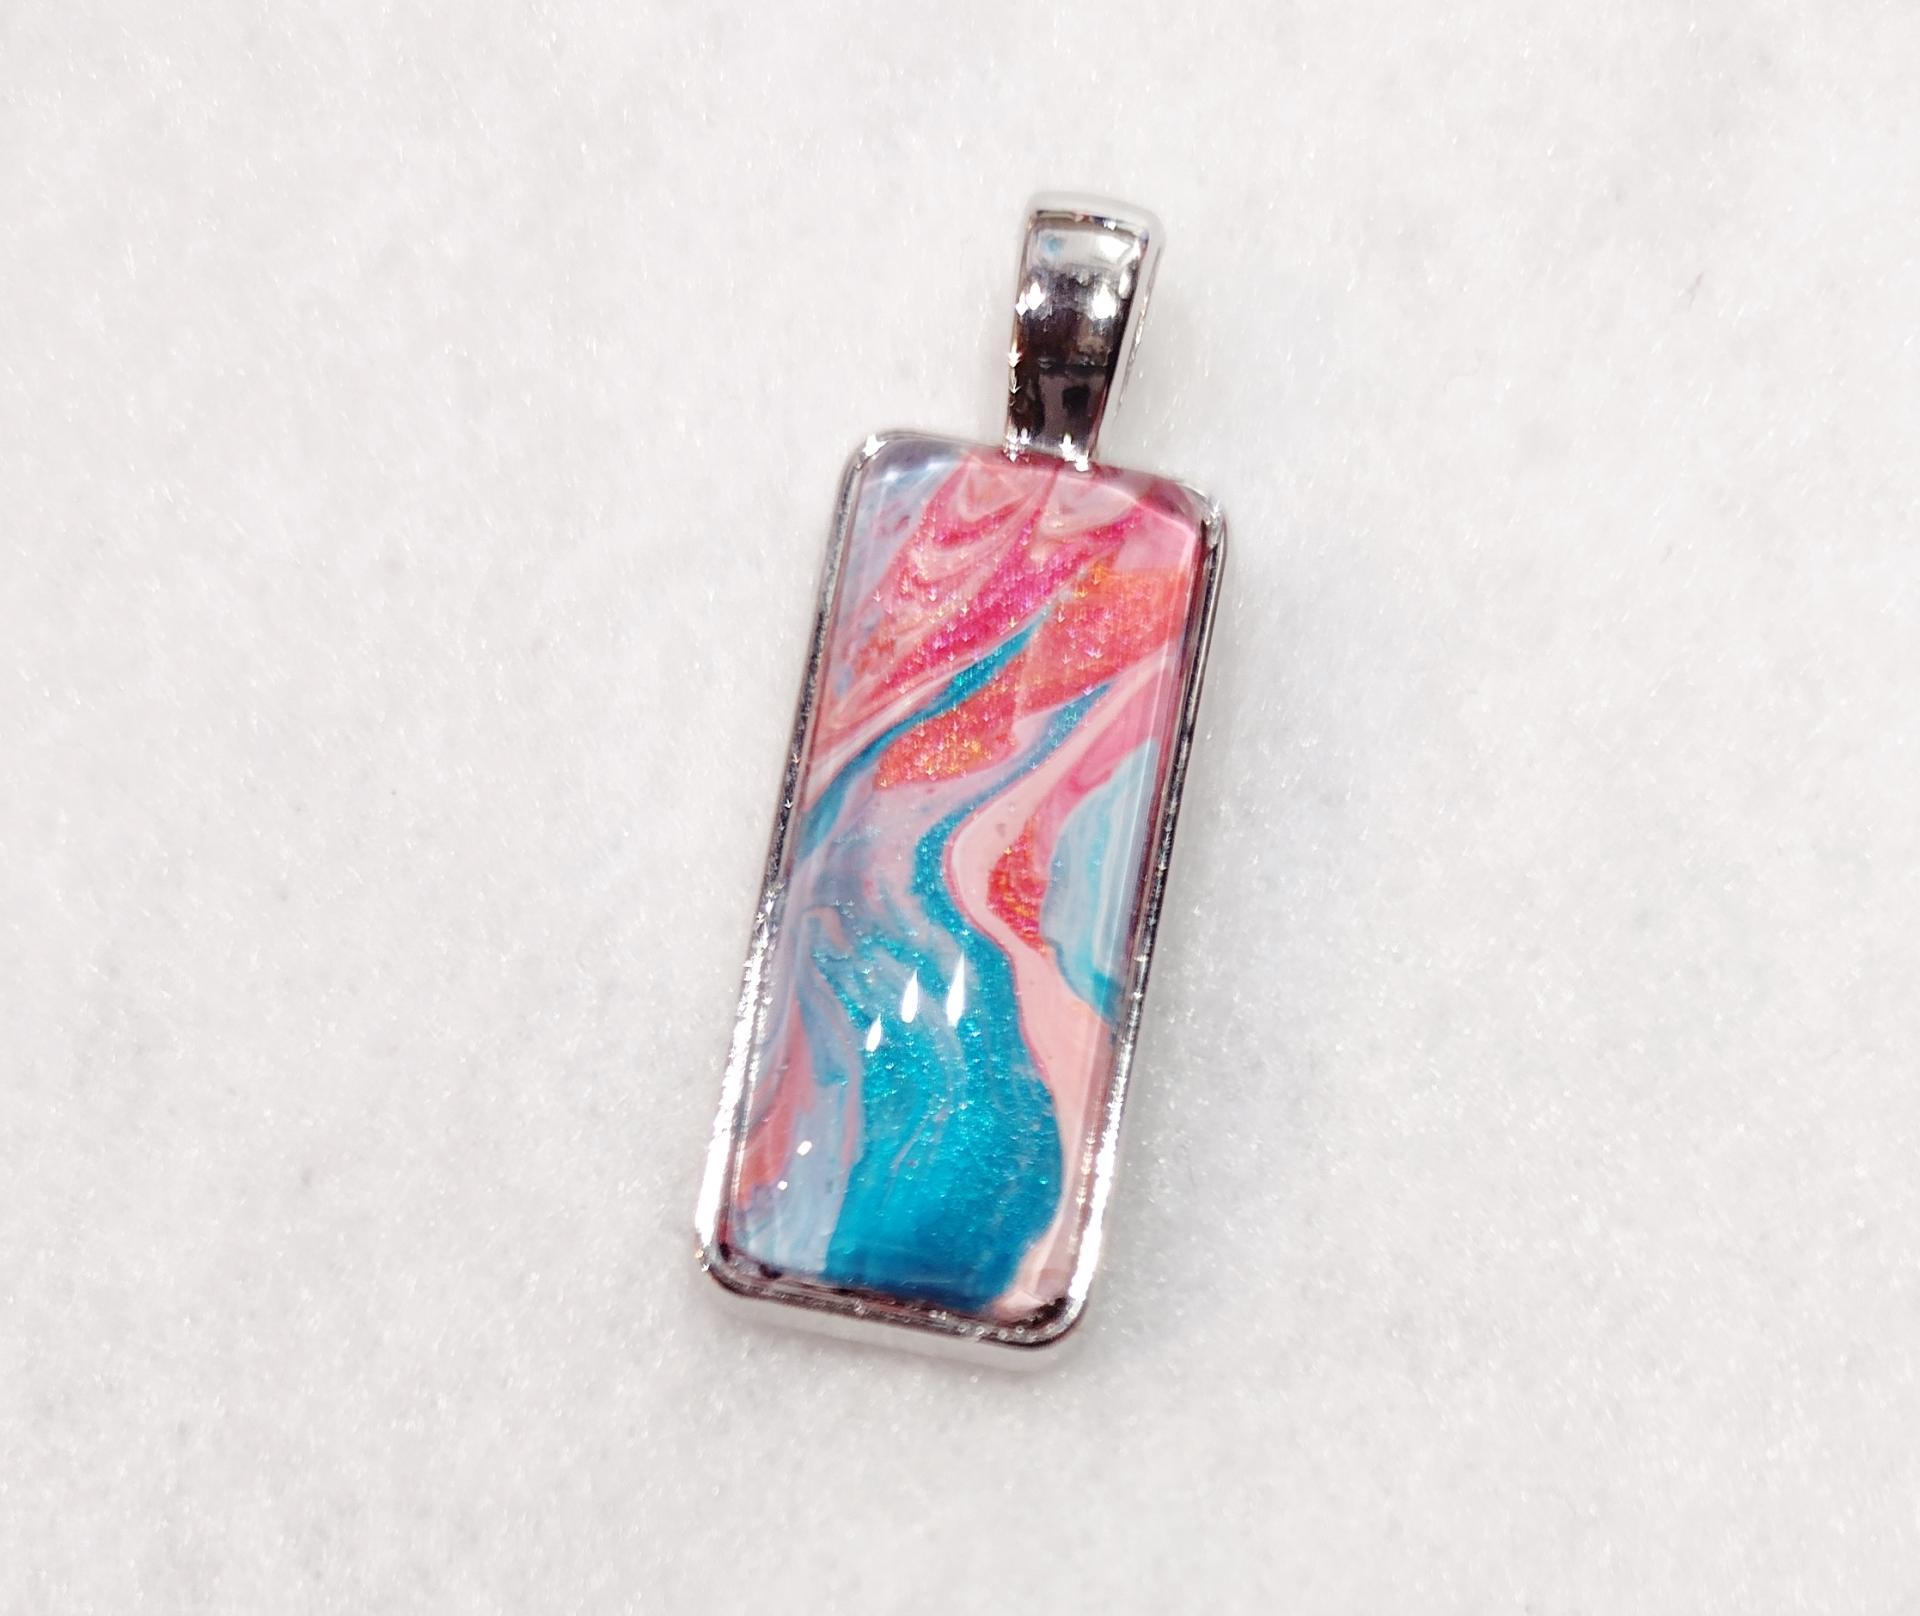 Painted Pendant, Coral Pink and Blue Swirls